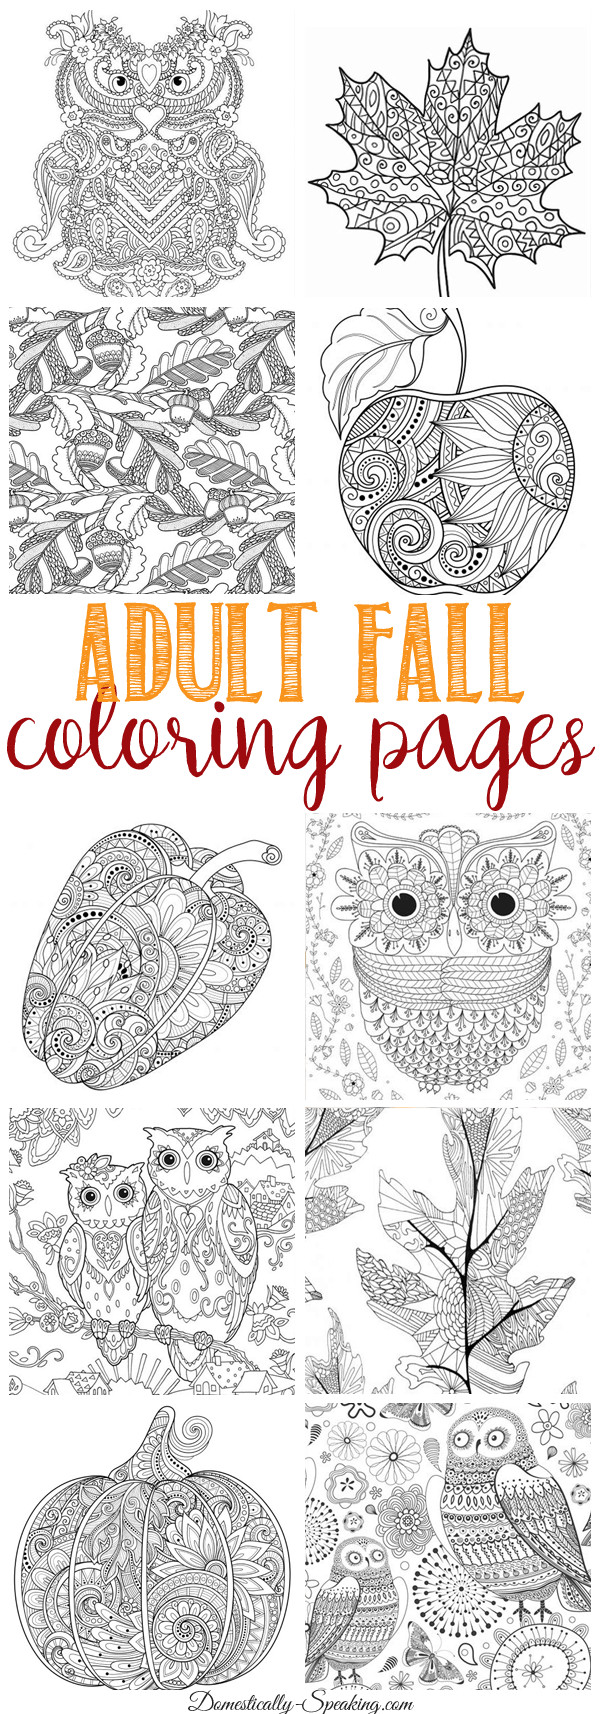 Adult Fall Coloring Pages
 Top Ten Posts of 2016 Page 4 of 5 Domestically Speaking